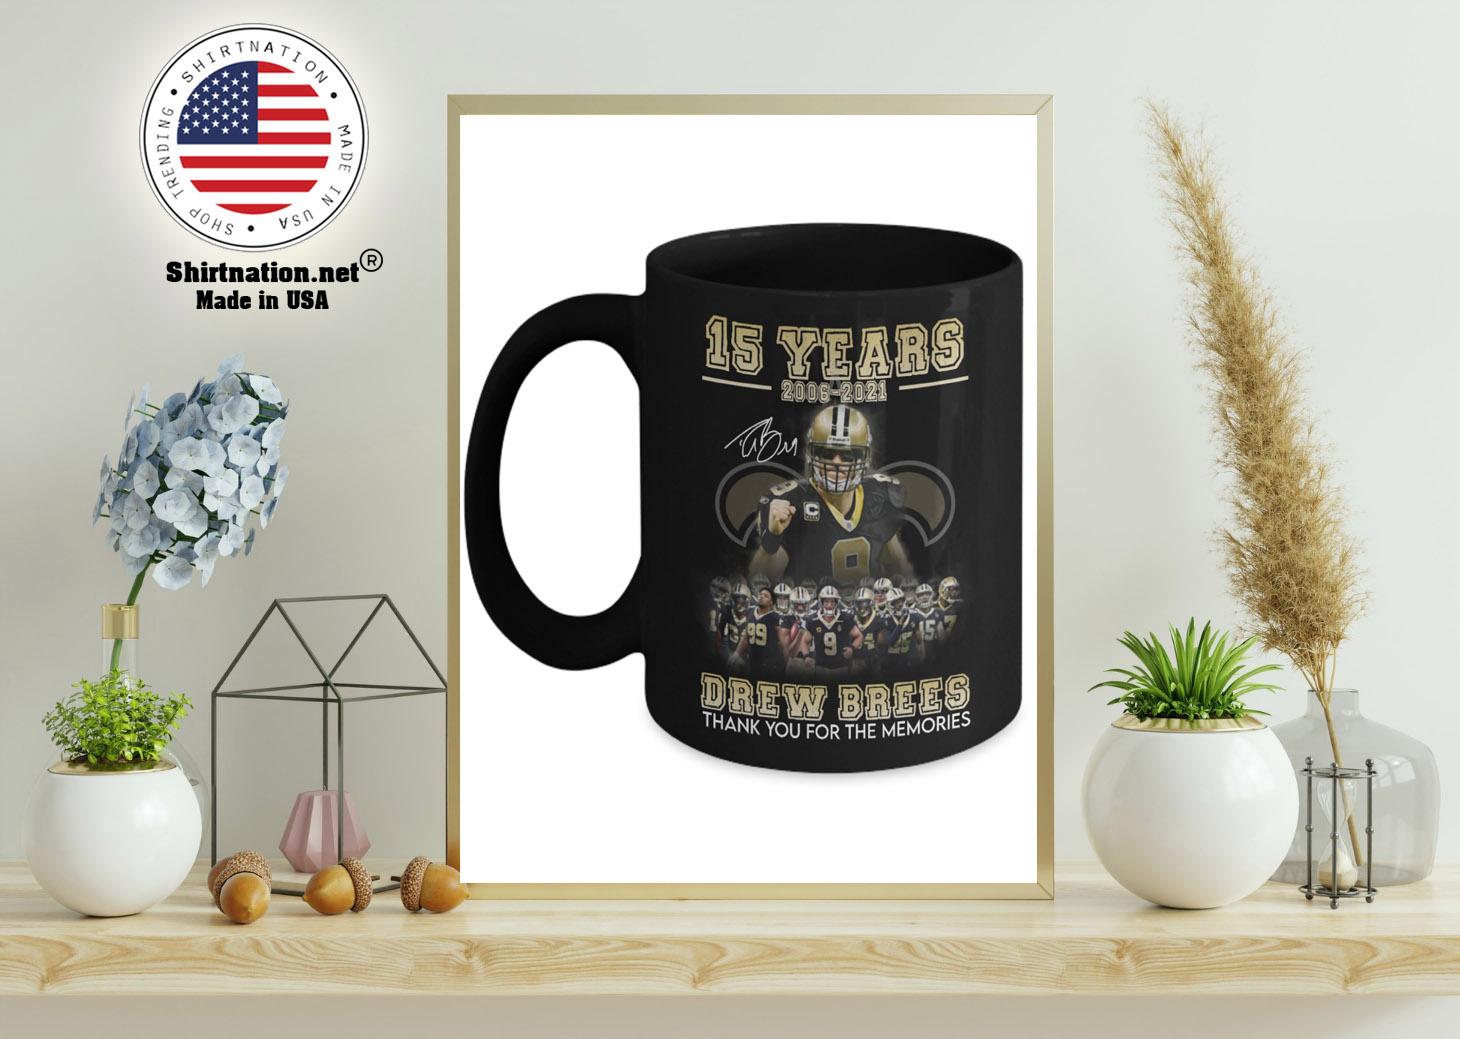 15 years 2006 2021 drew brees thank you for the memories mug 11